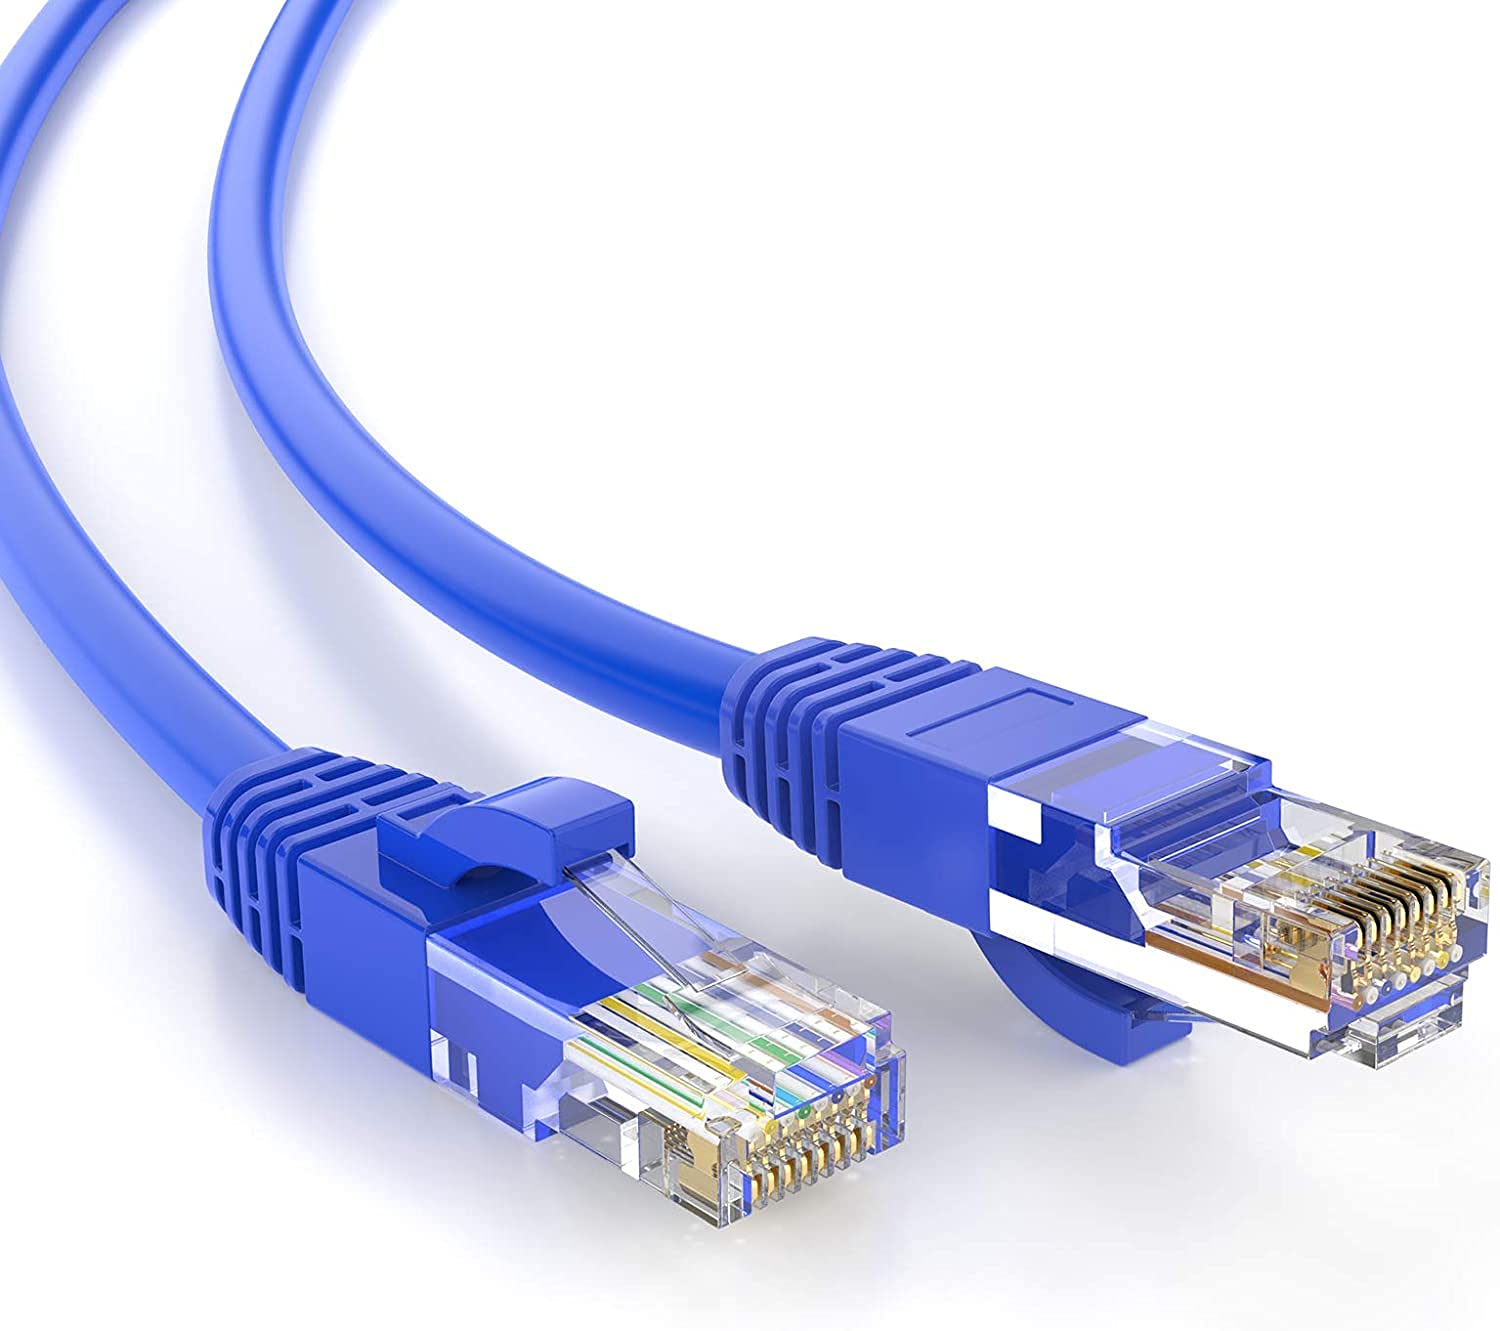 How to Splice an Ethernet Cable? - SolderStick